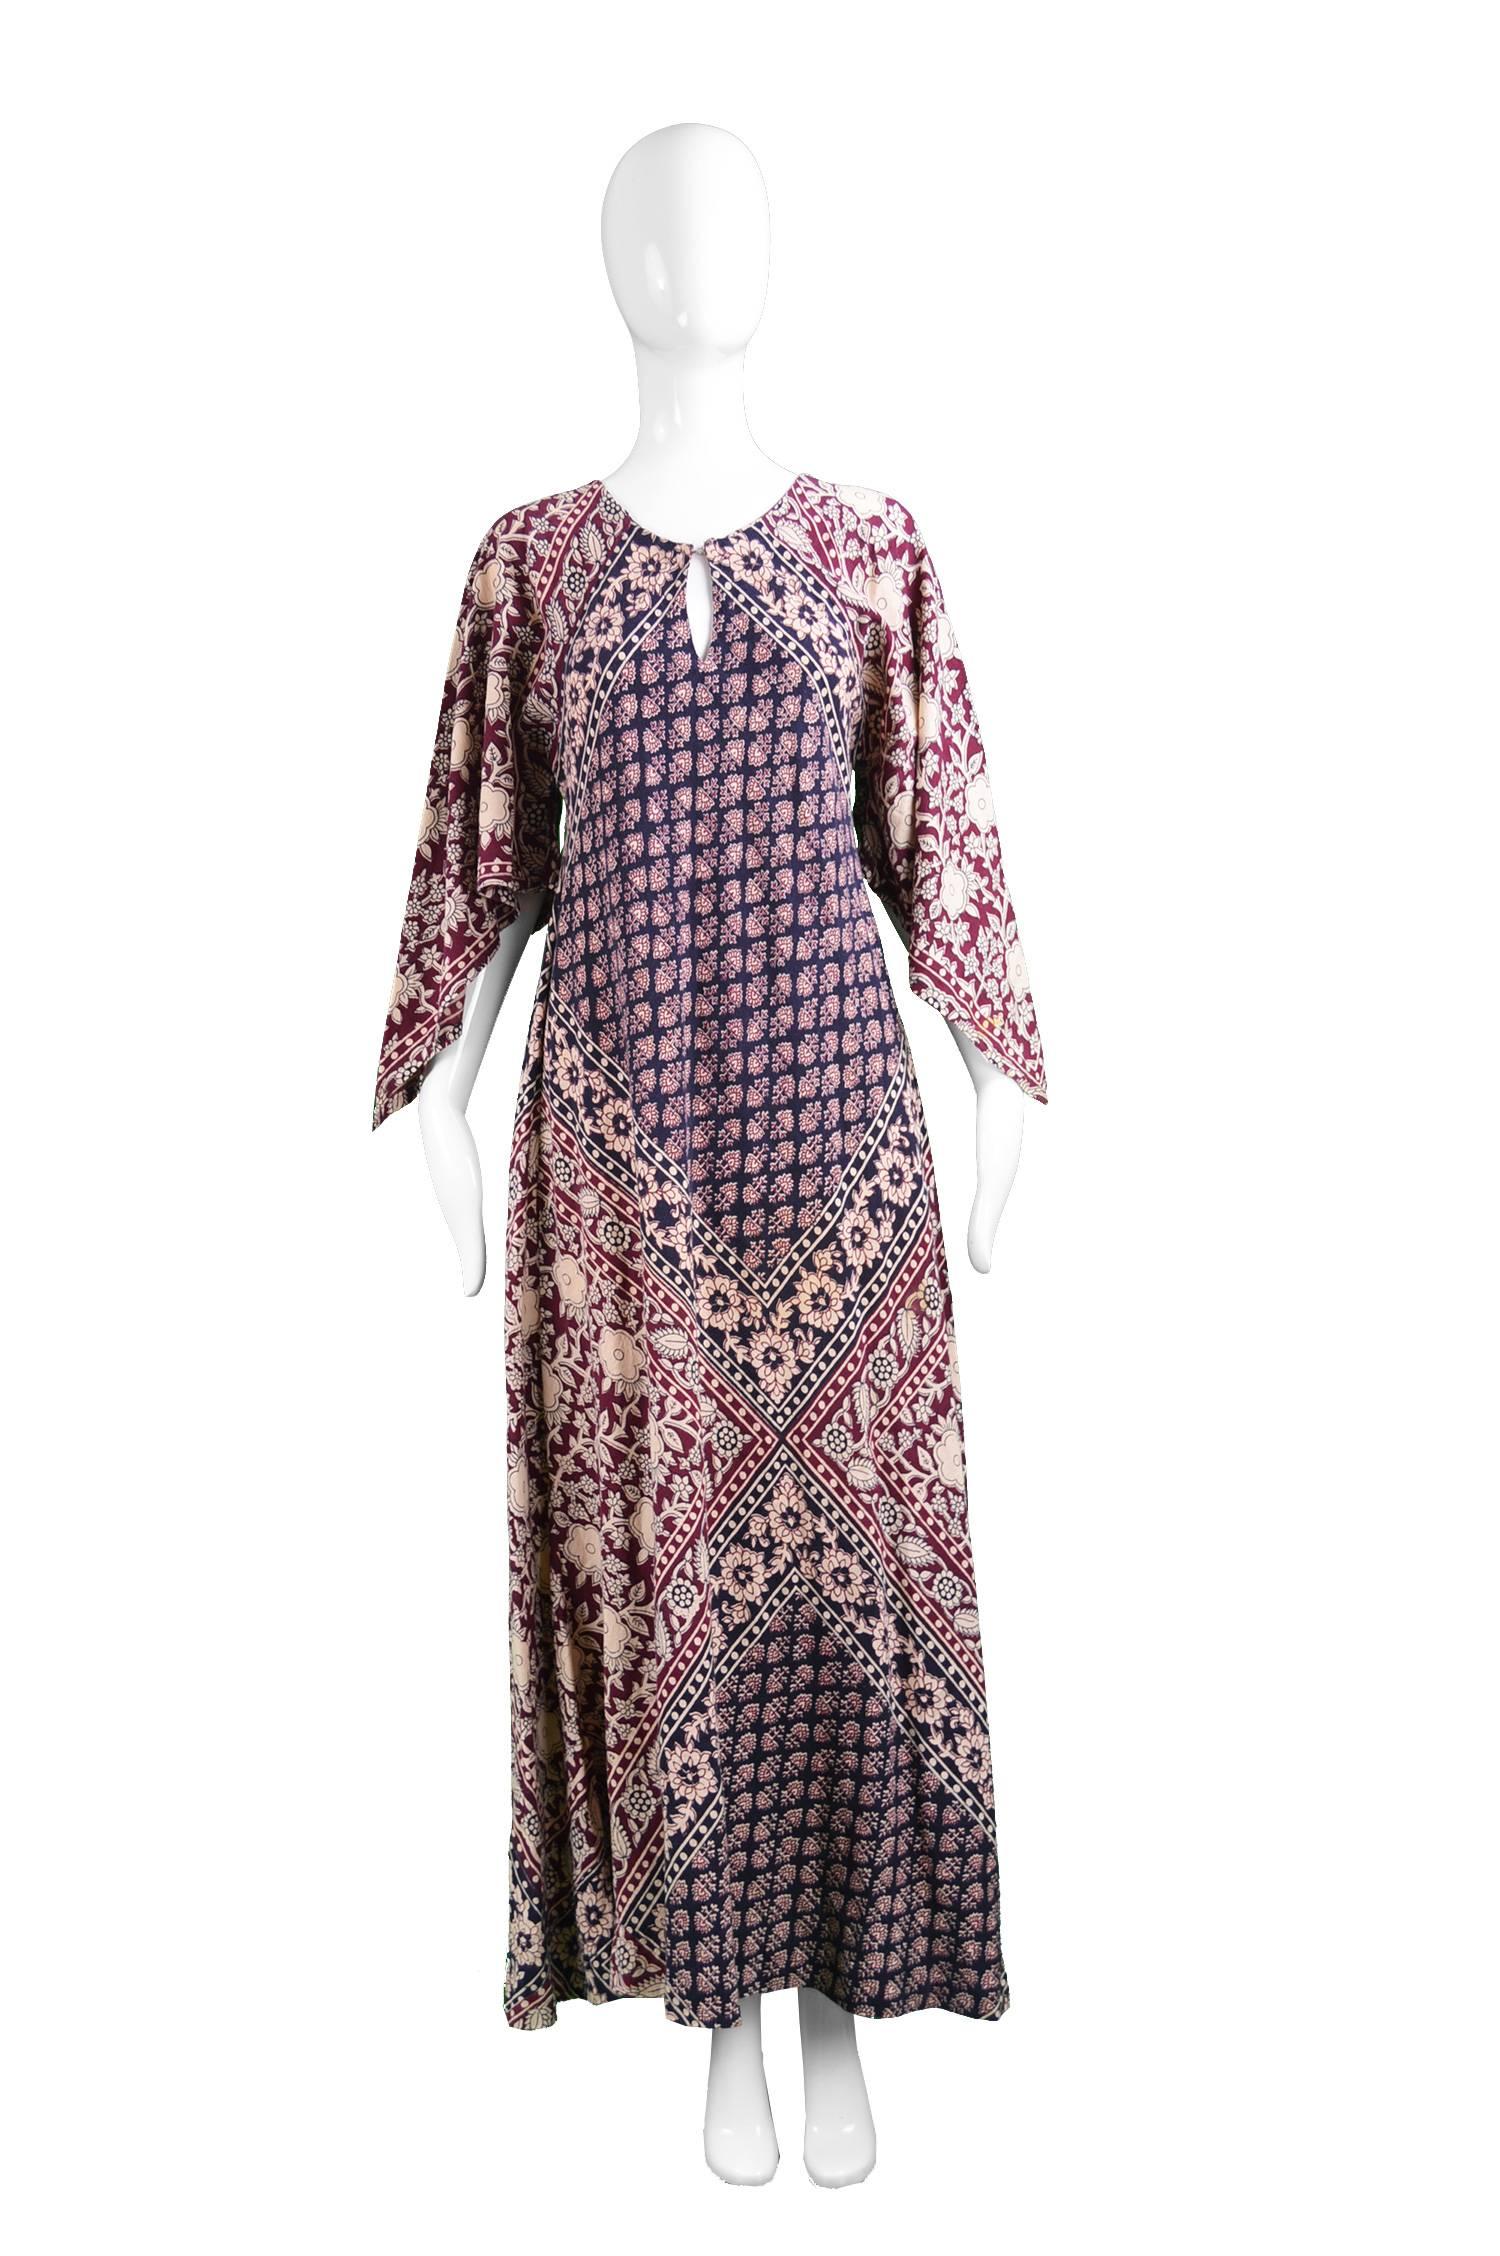 A beautiful vintage bohemian maxi caftan dress with a loose flowing fit from the 70s with a striking Indian floral block print throughout a medium weight cotton with pointed sleeves that gives a striking ethnic hippie look, perfect for summer days.